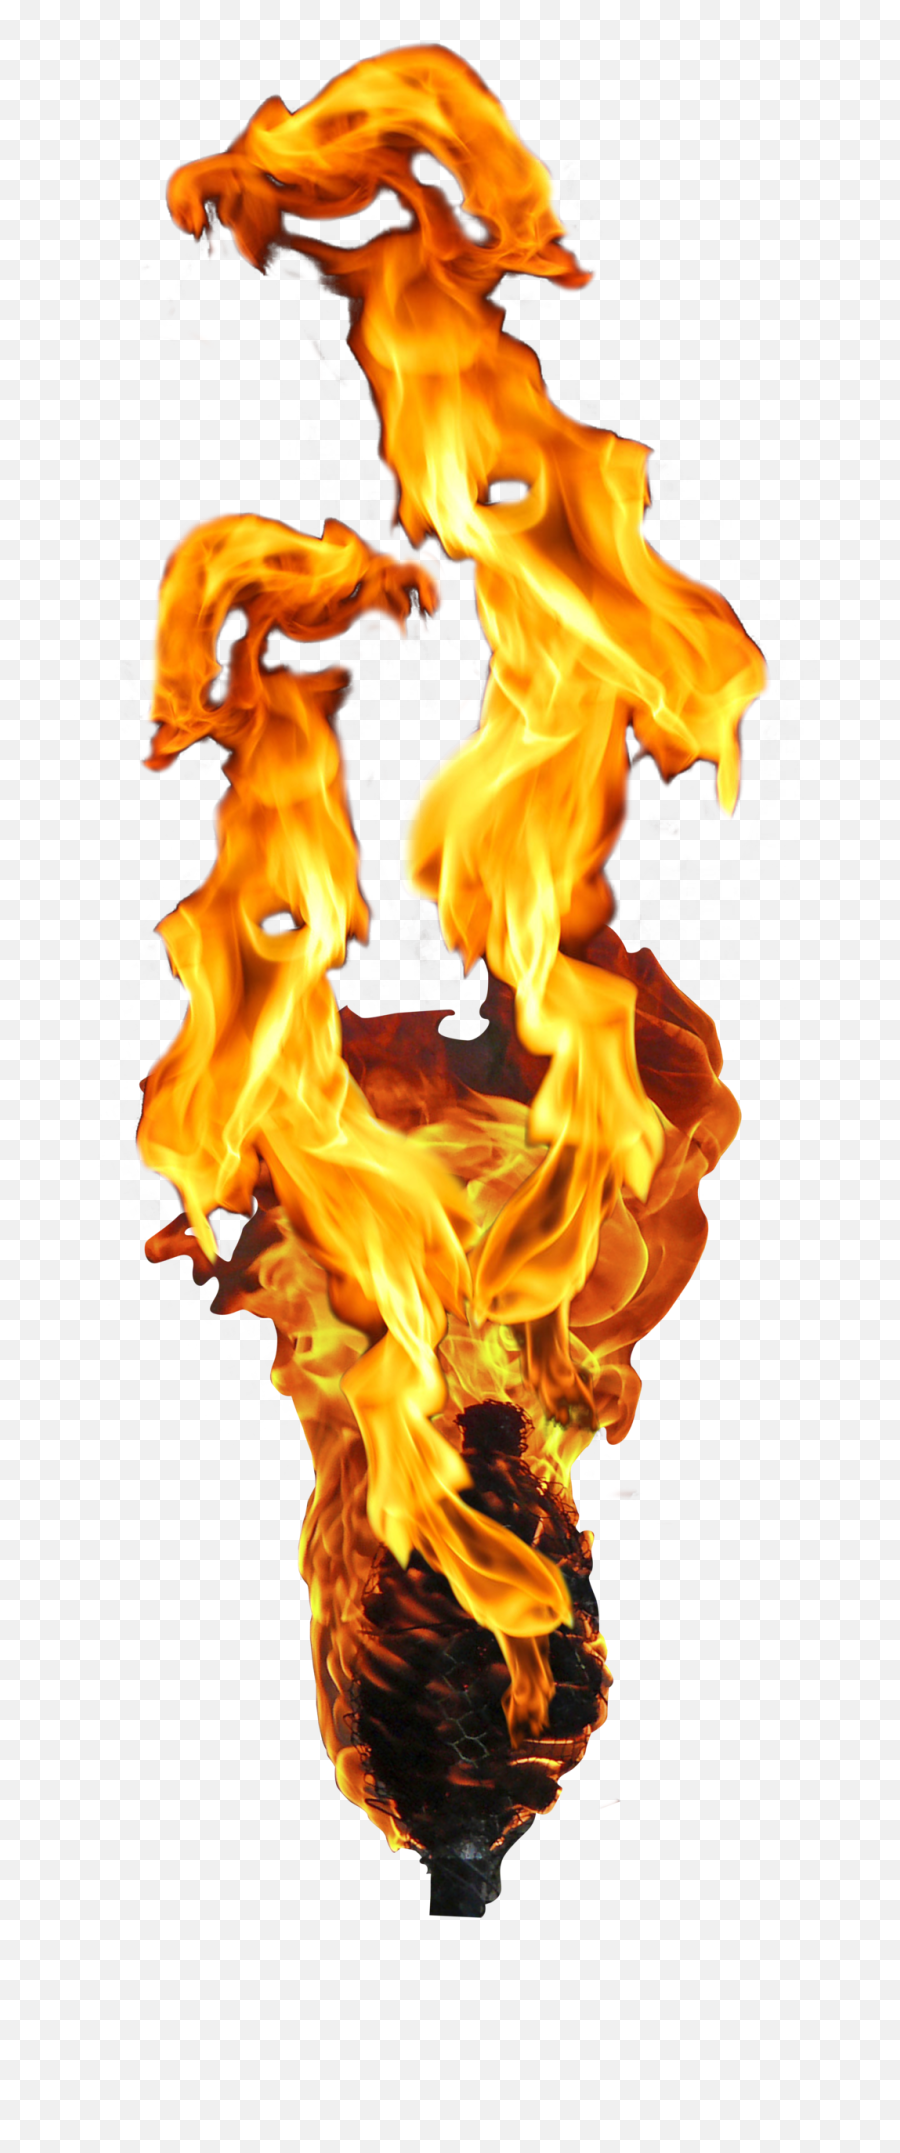 Flame Light Fire Torch - I Flame Png Download 10242501 Fire Torch Flame Png,Torch Transparent